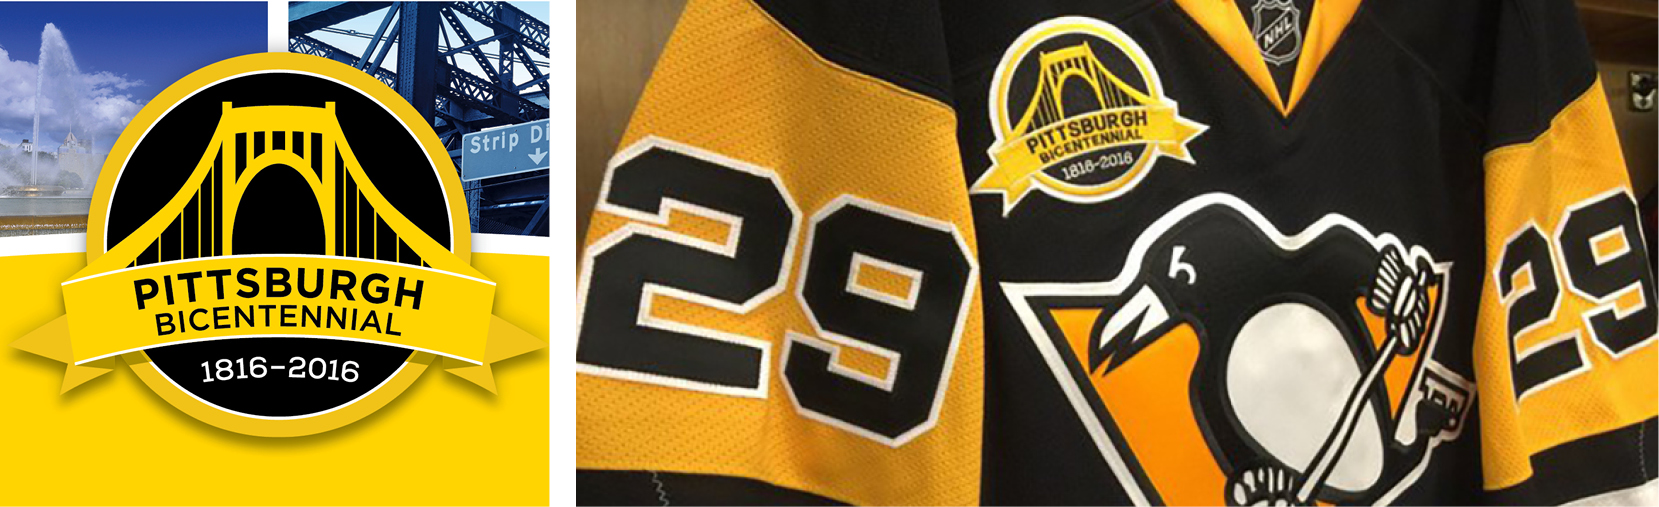 Pittsburgh 200 Logo and Penguins jersey